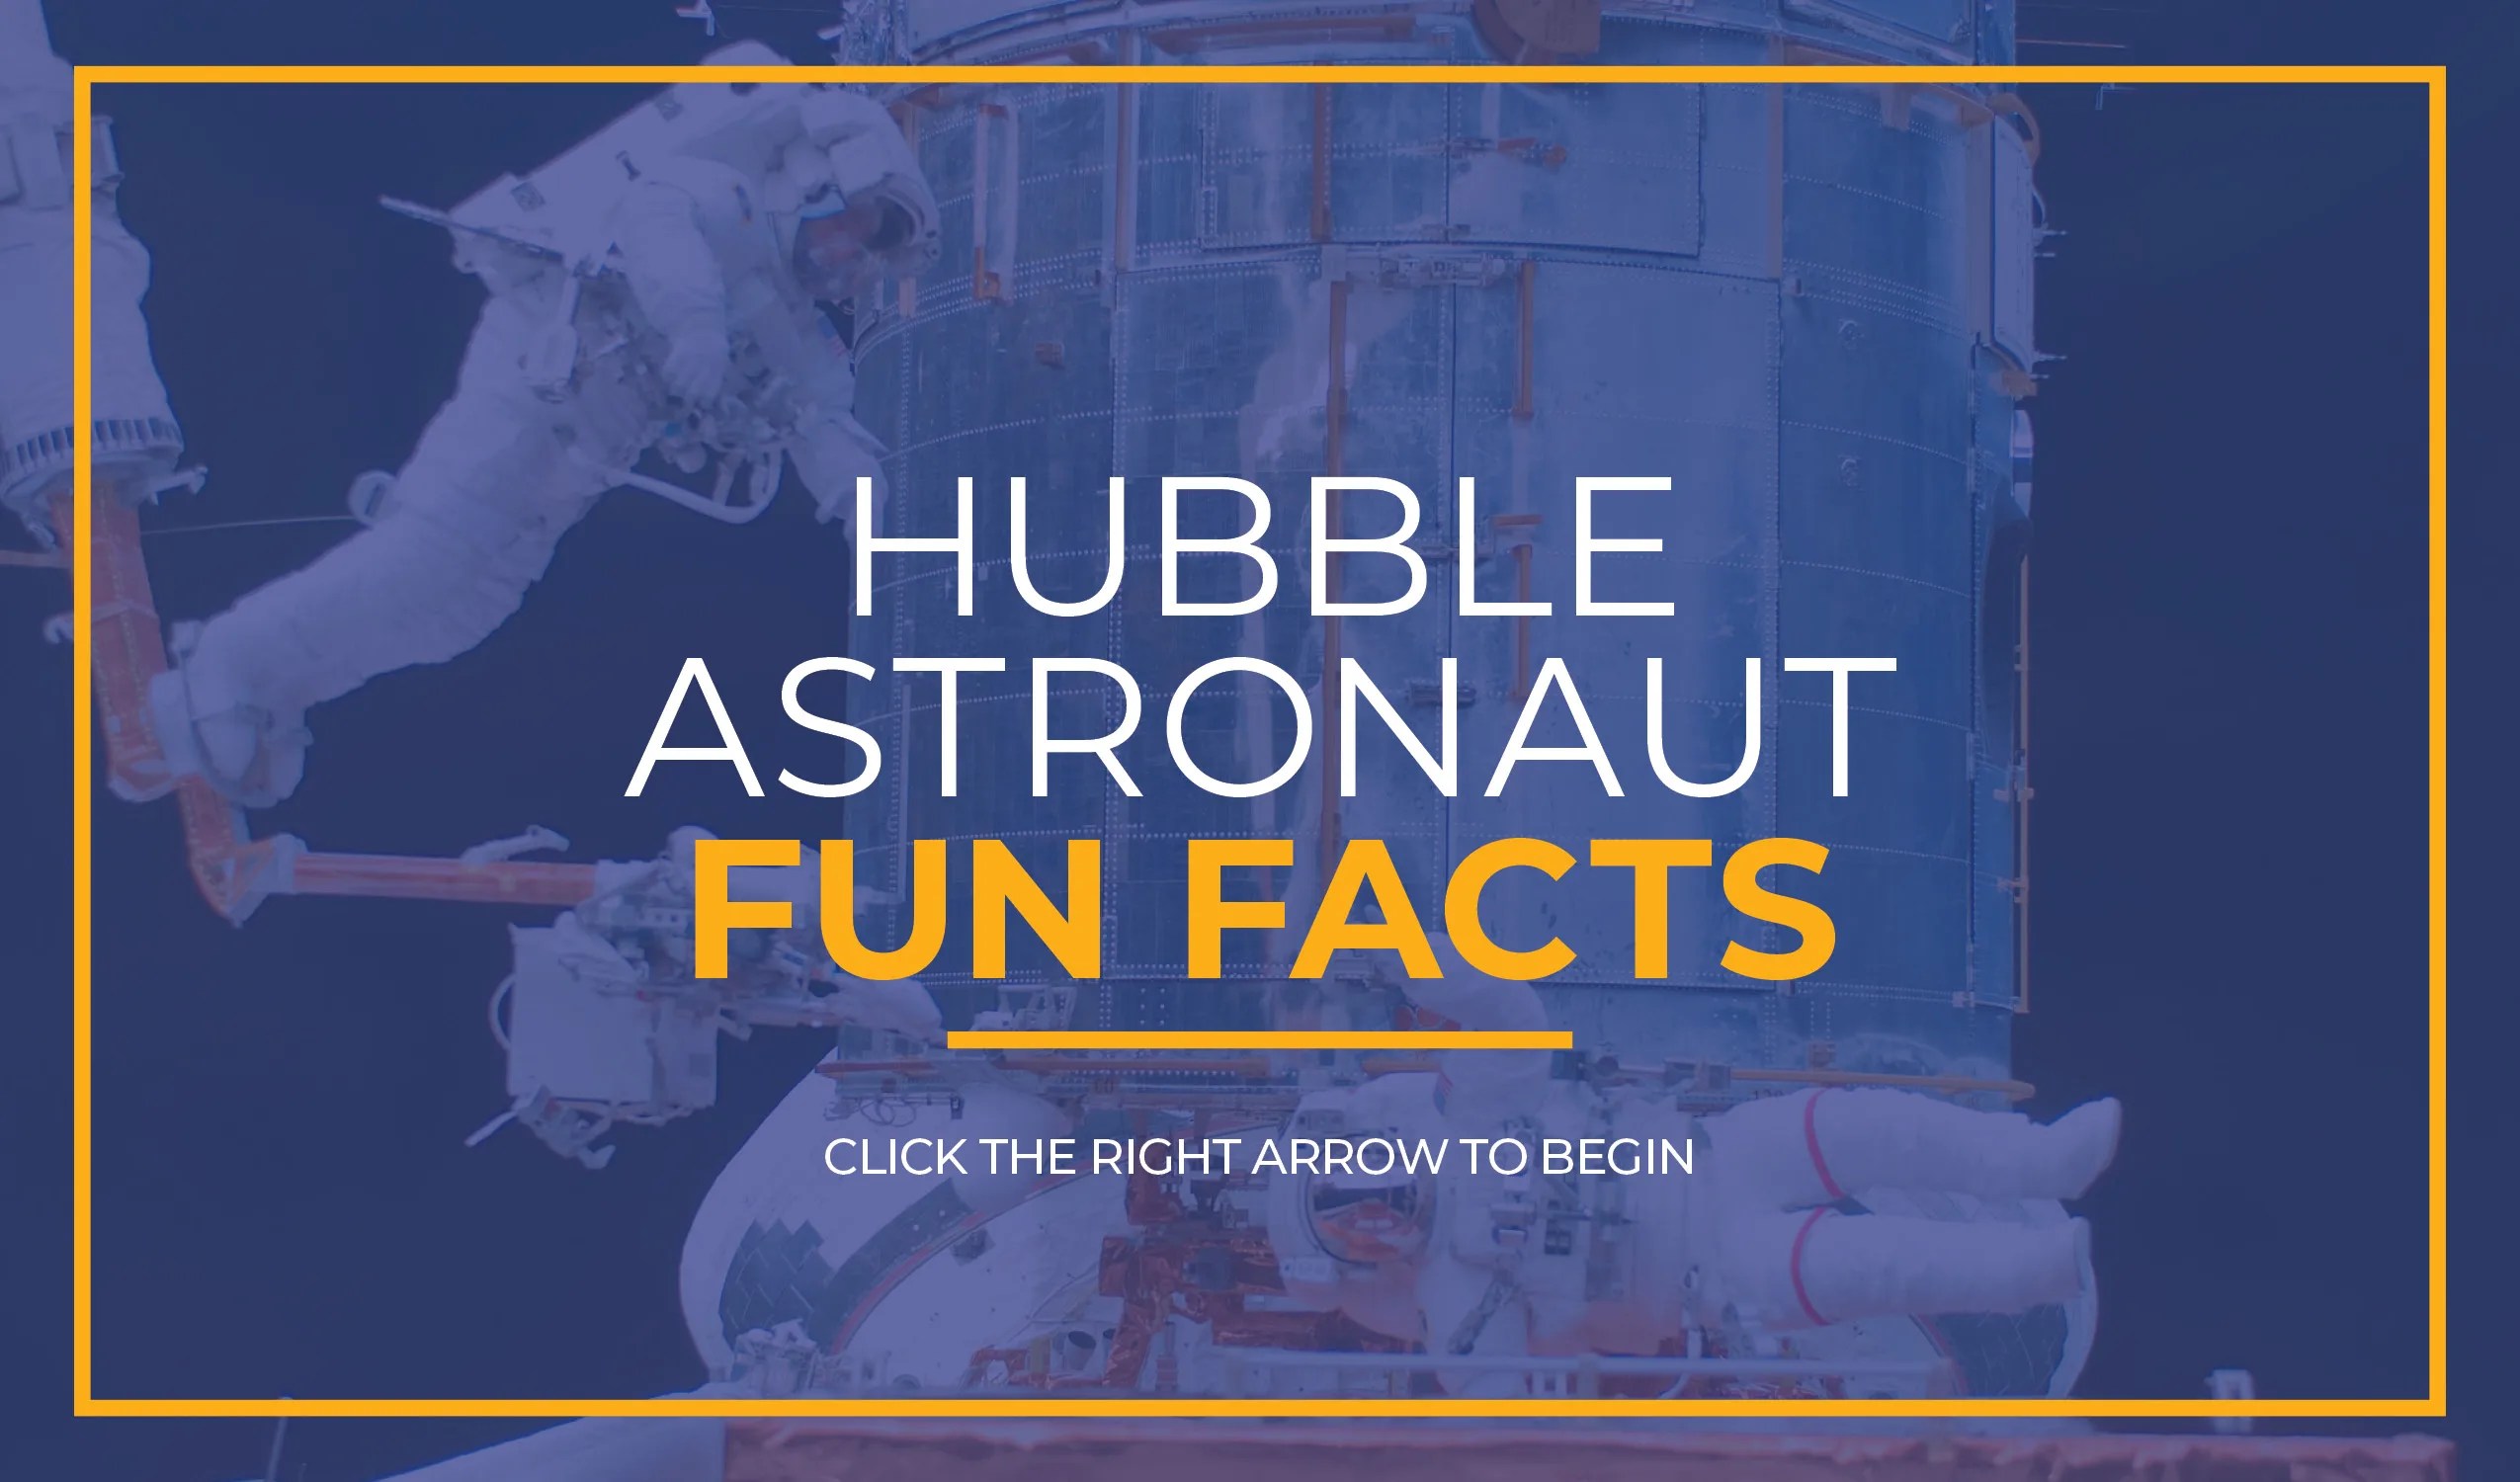 A title slide that says "astronaut Fun Facts"